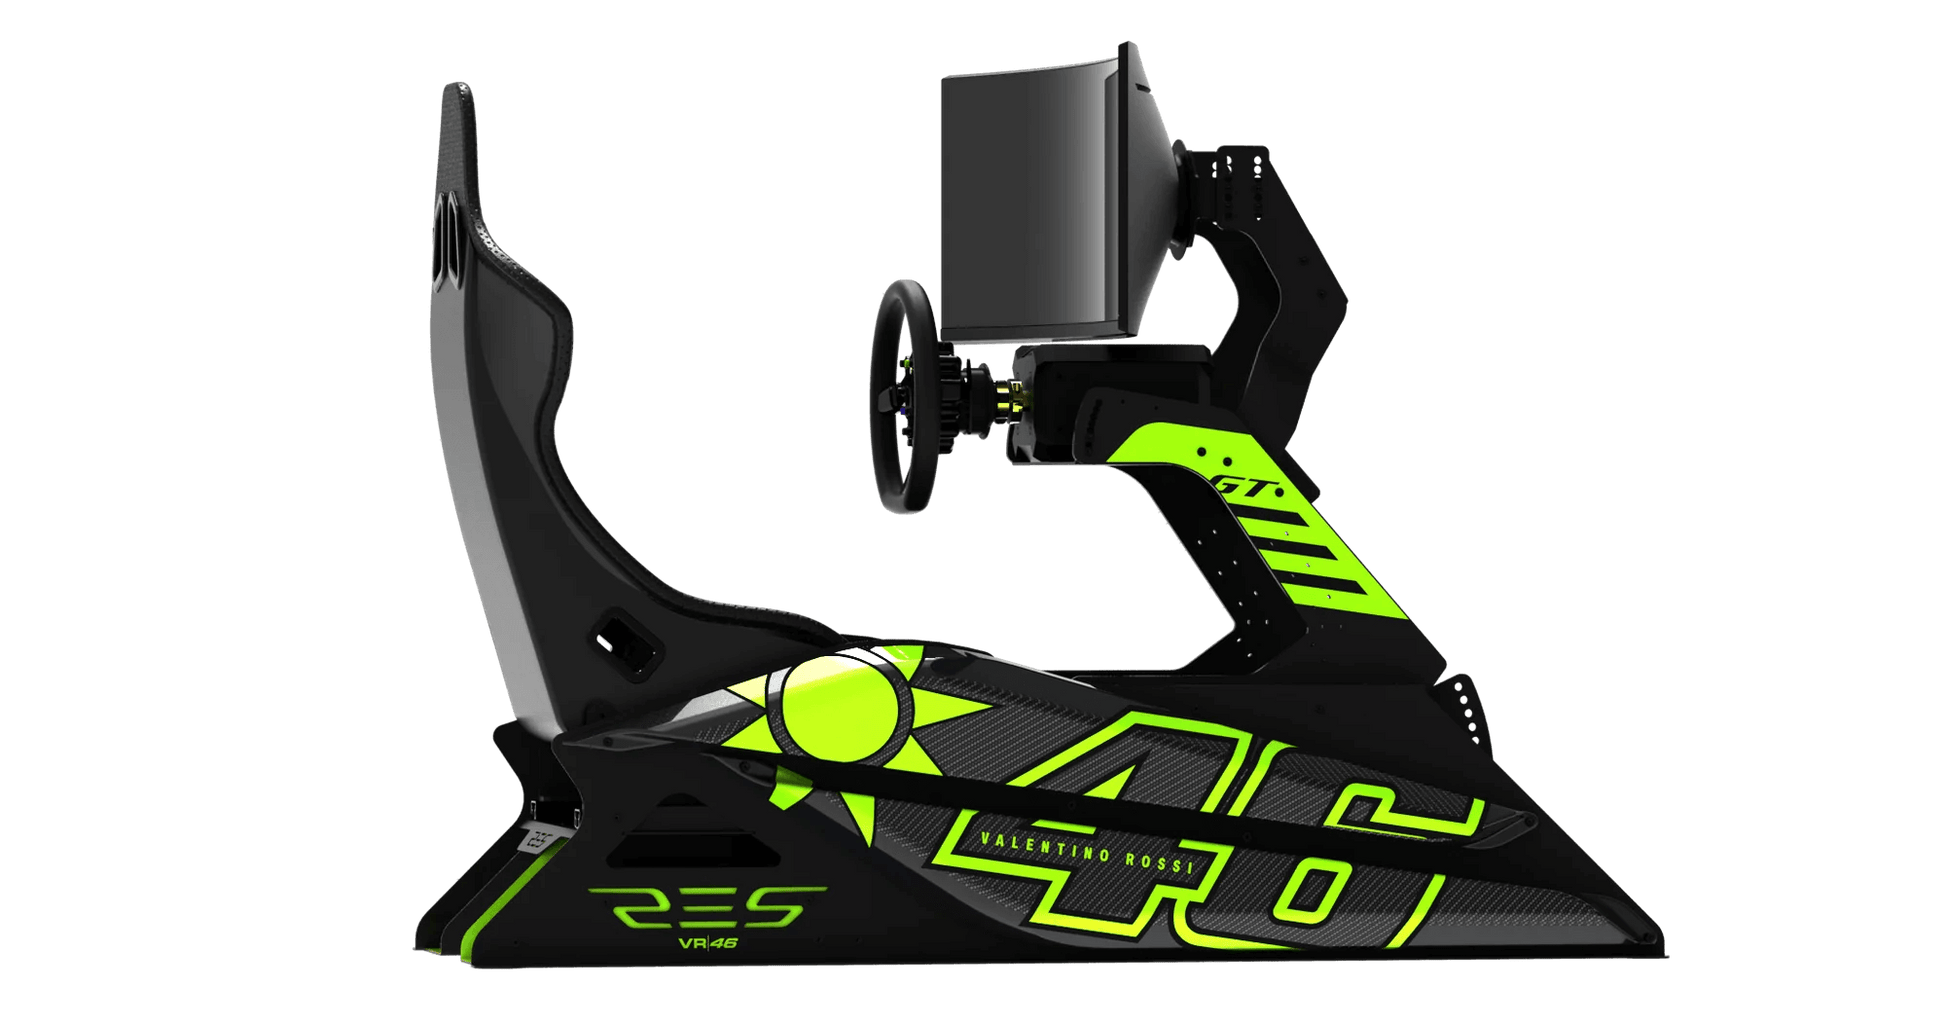 Res-Tech VR/46 - GT - Limited Edition - SimBelgium®